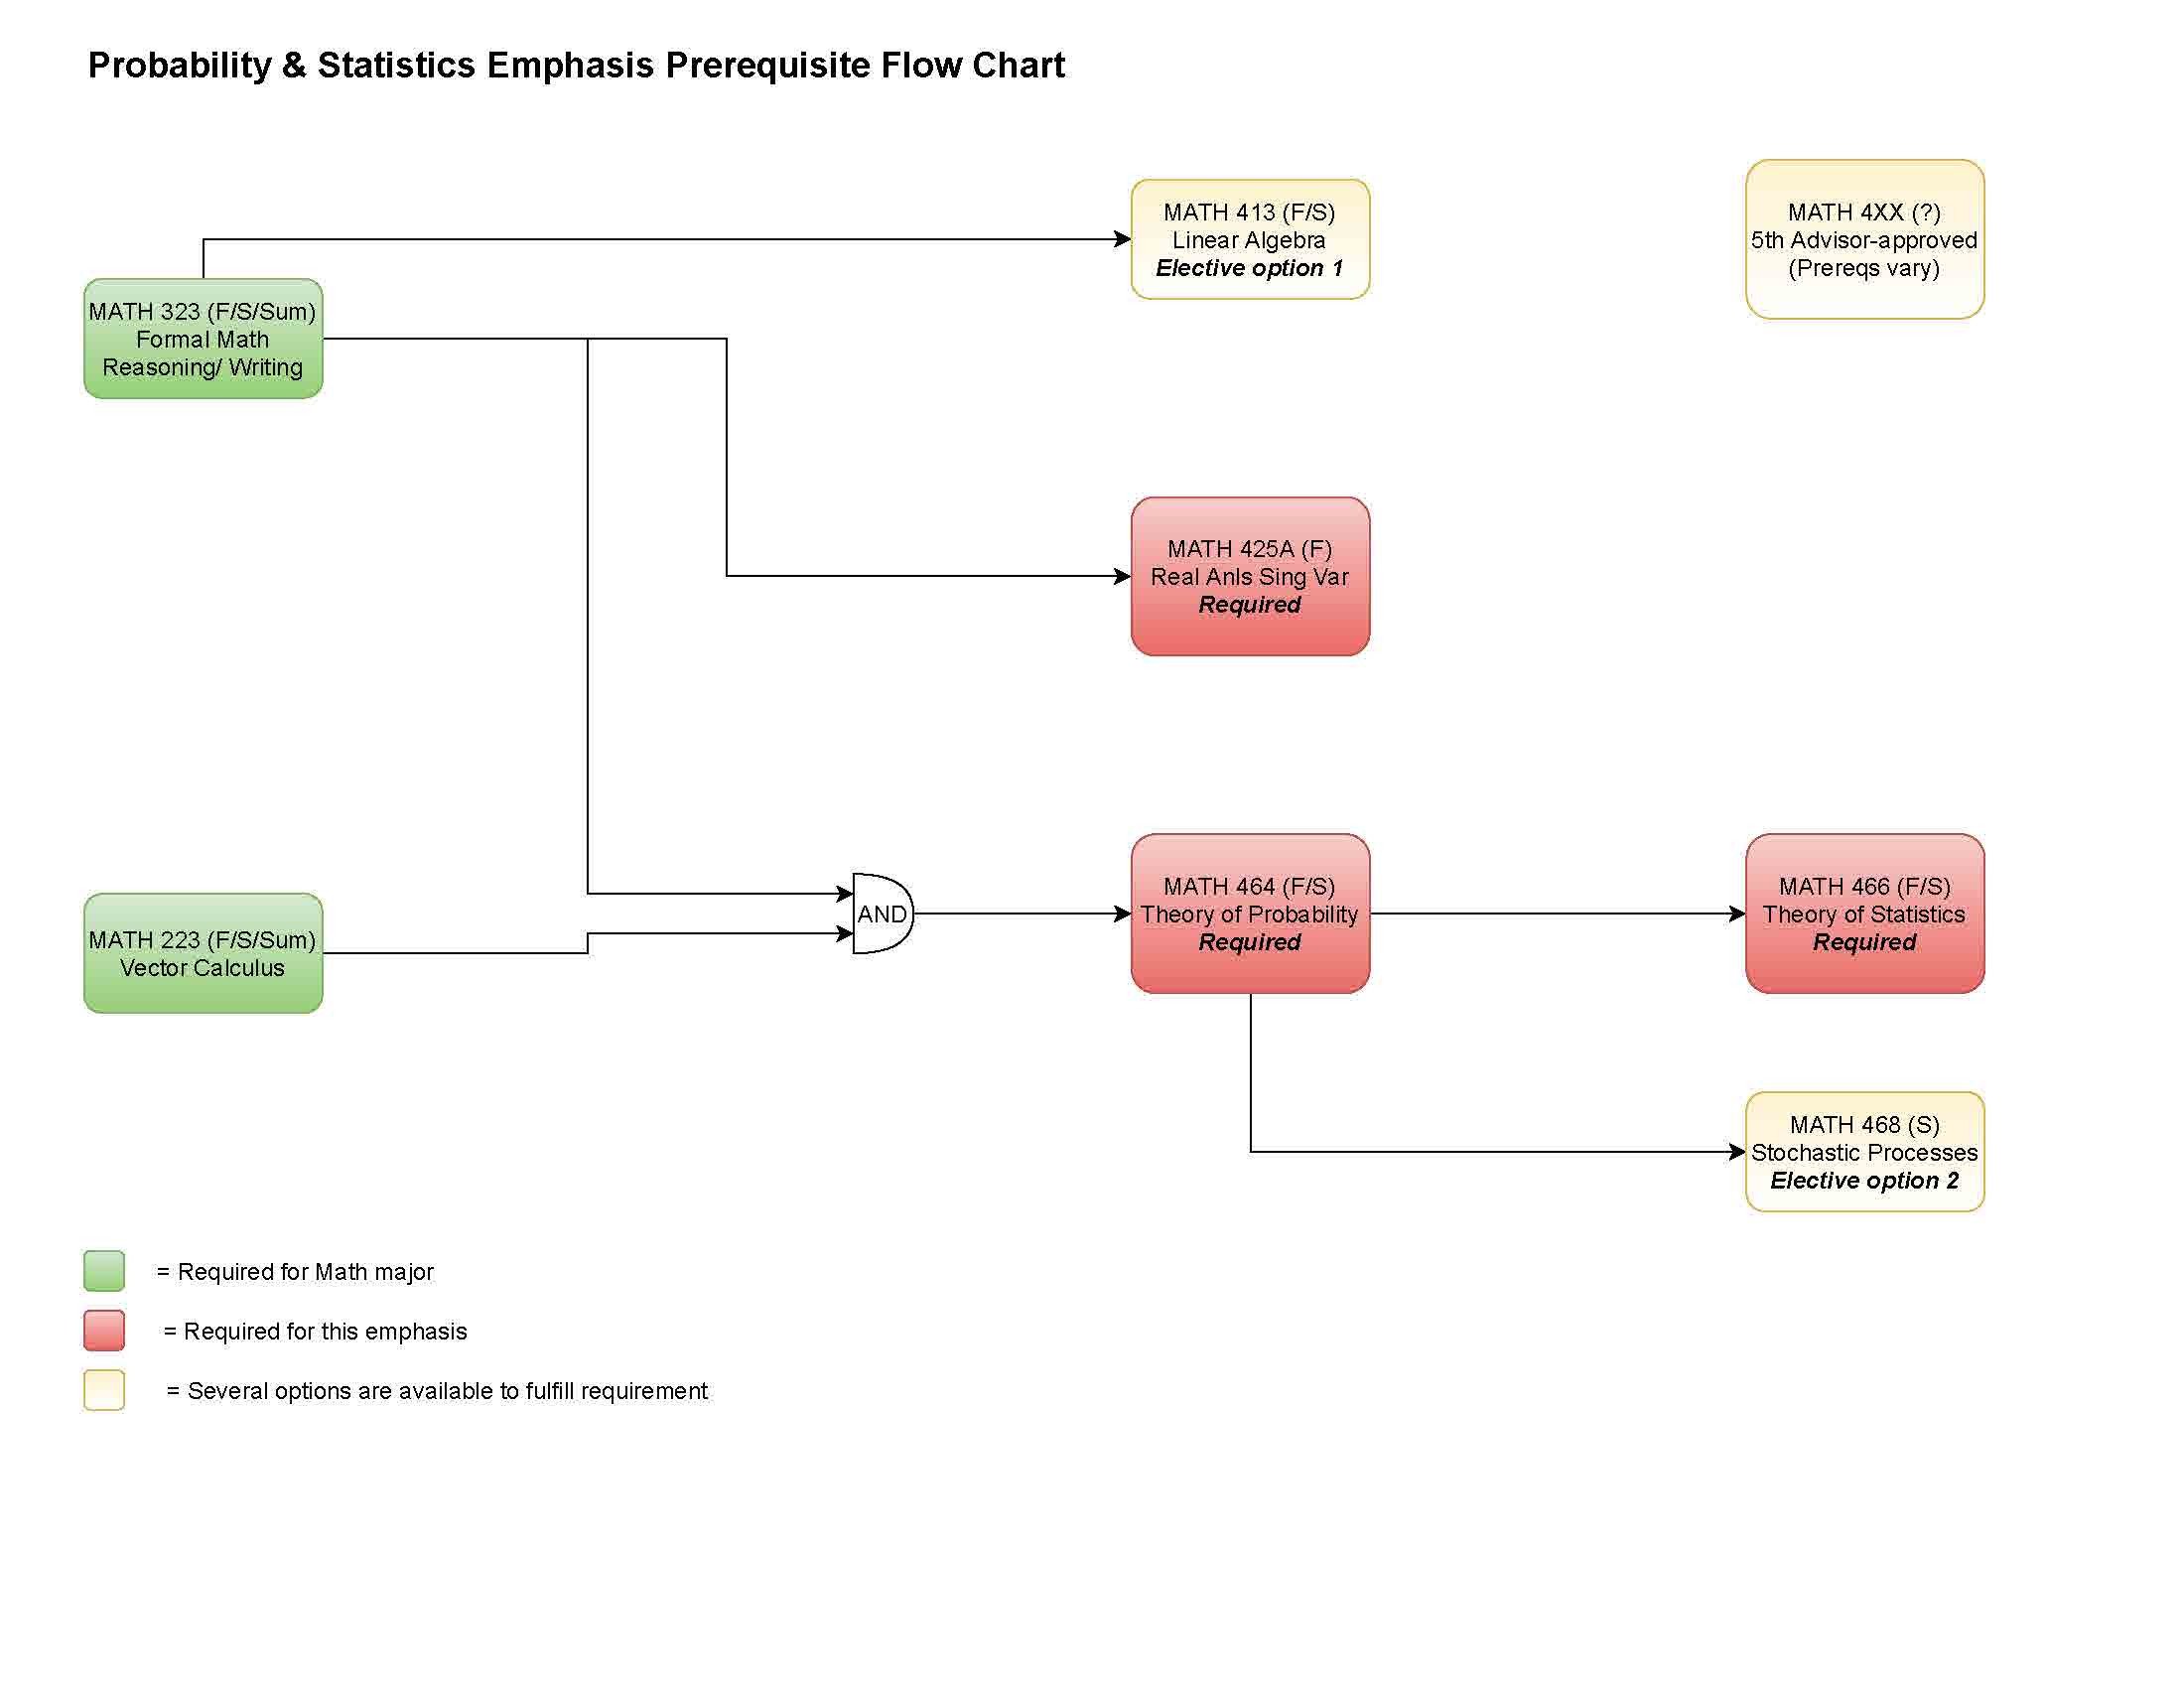 prerequisite flowchart for probability & statistics emphasis (click image for downloadable PDF)